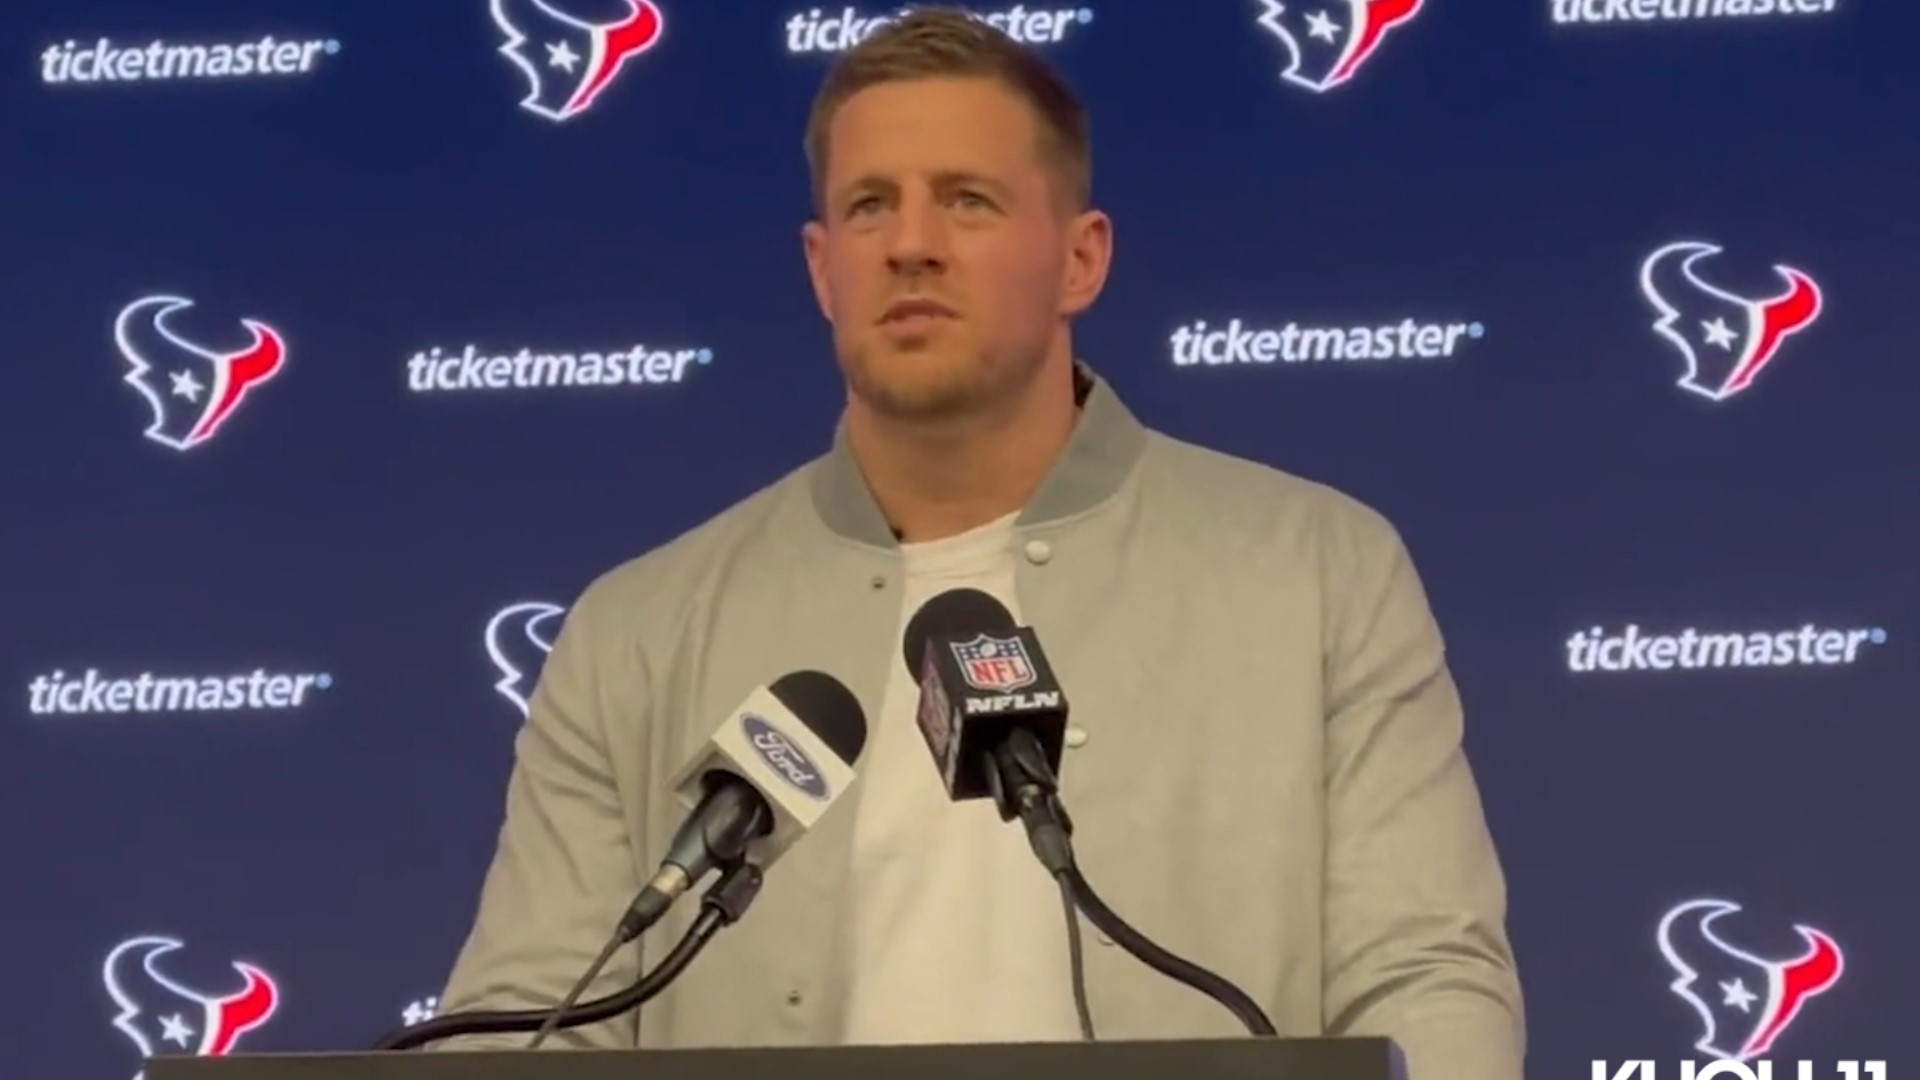 JJ Watt will be inducted into the Texans Ring of Honor at halftime of the Pittsburgh-Houston game.